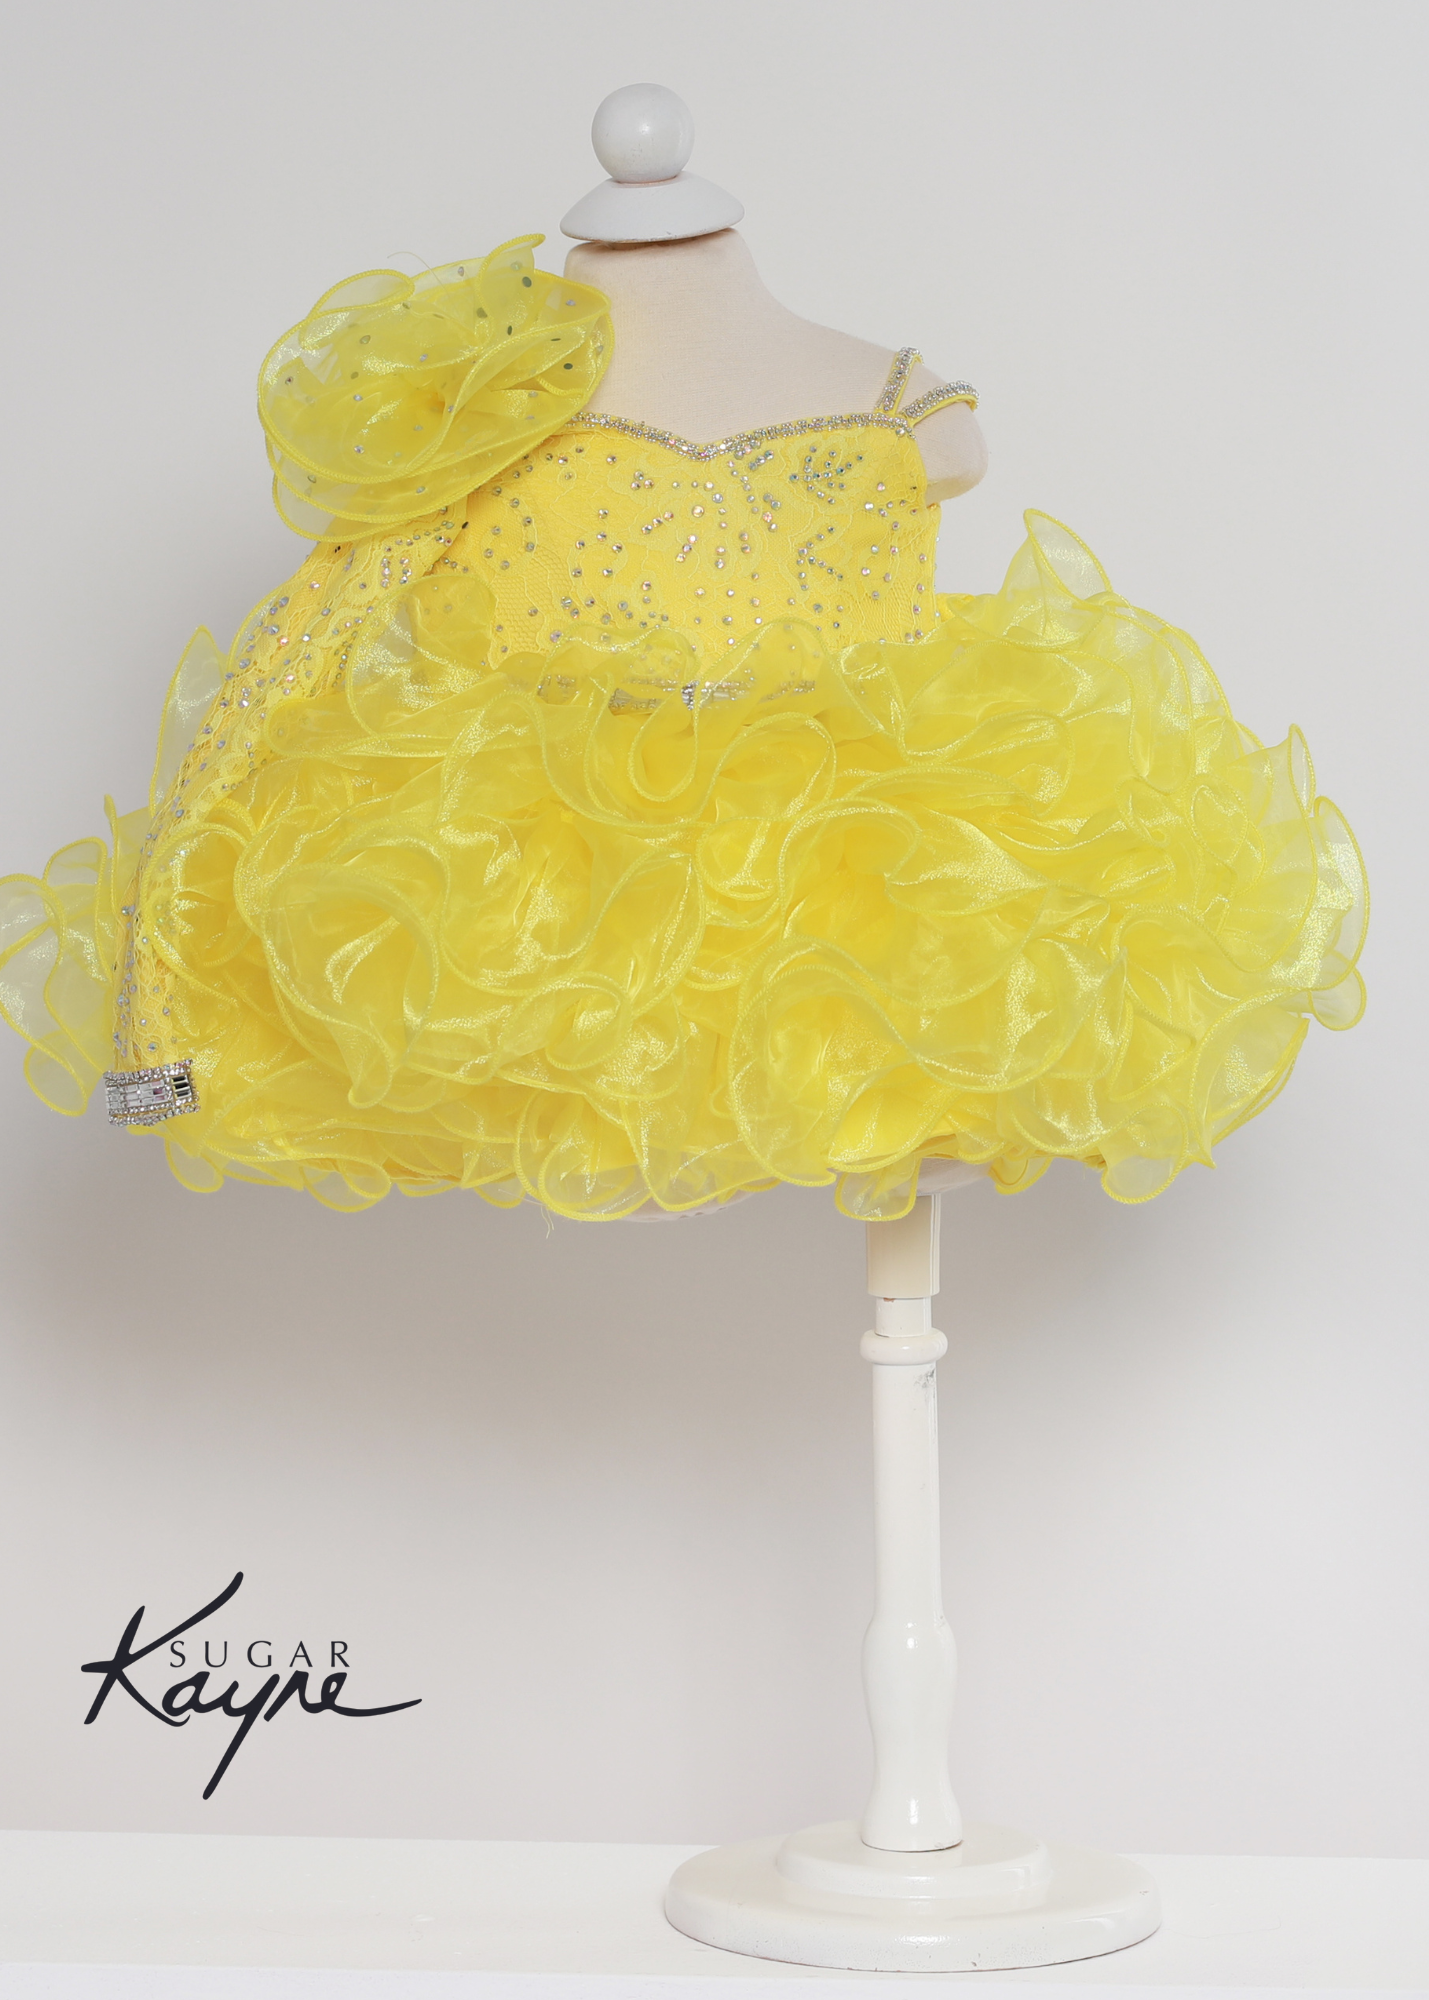 Sugar Kayne C218 Girls Baby Sheer Lace Long Sleeve Cupcake Pageant Dress Crystal Cuff Corset. Have your little cupcake bring on all the charm in this stunning organza and stretch lace gown. The corset back is the perfect addition as the little one grows!  Colors: Baby Pink, Canary Yellow, Electric Blue  Sizes: 0M, 12M, 18M, 24M, 2T, 3T, 4T, 5T, 6M, 6T  Fabric Mesh, Satin Lining